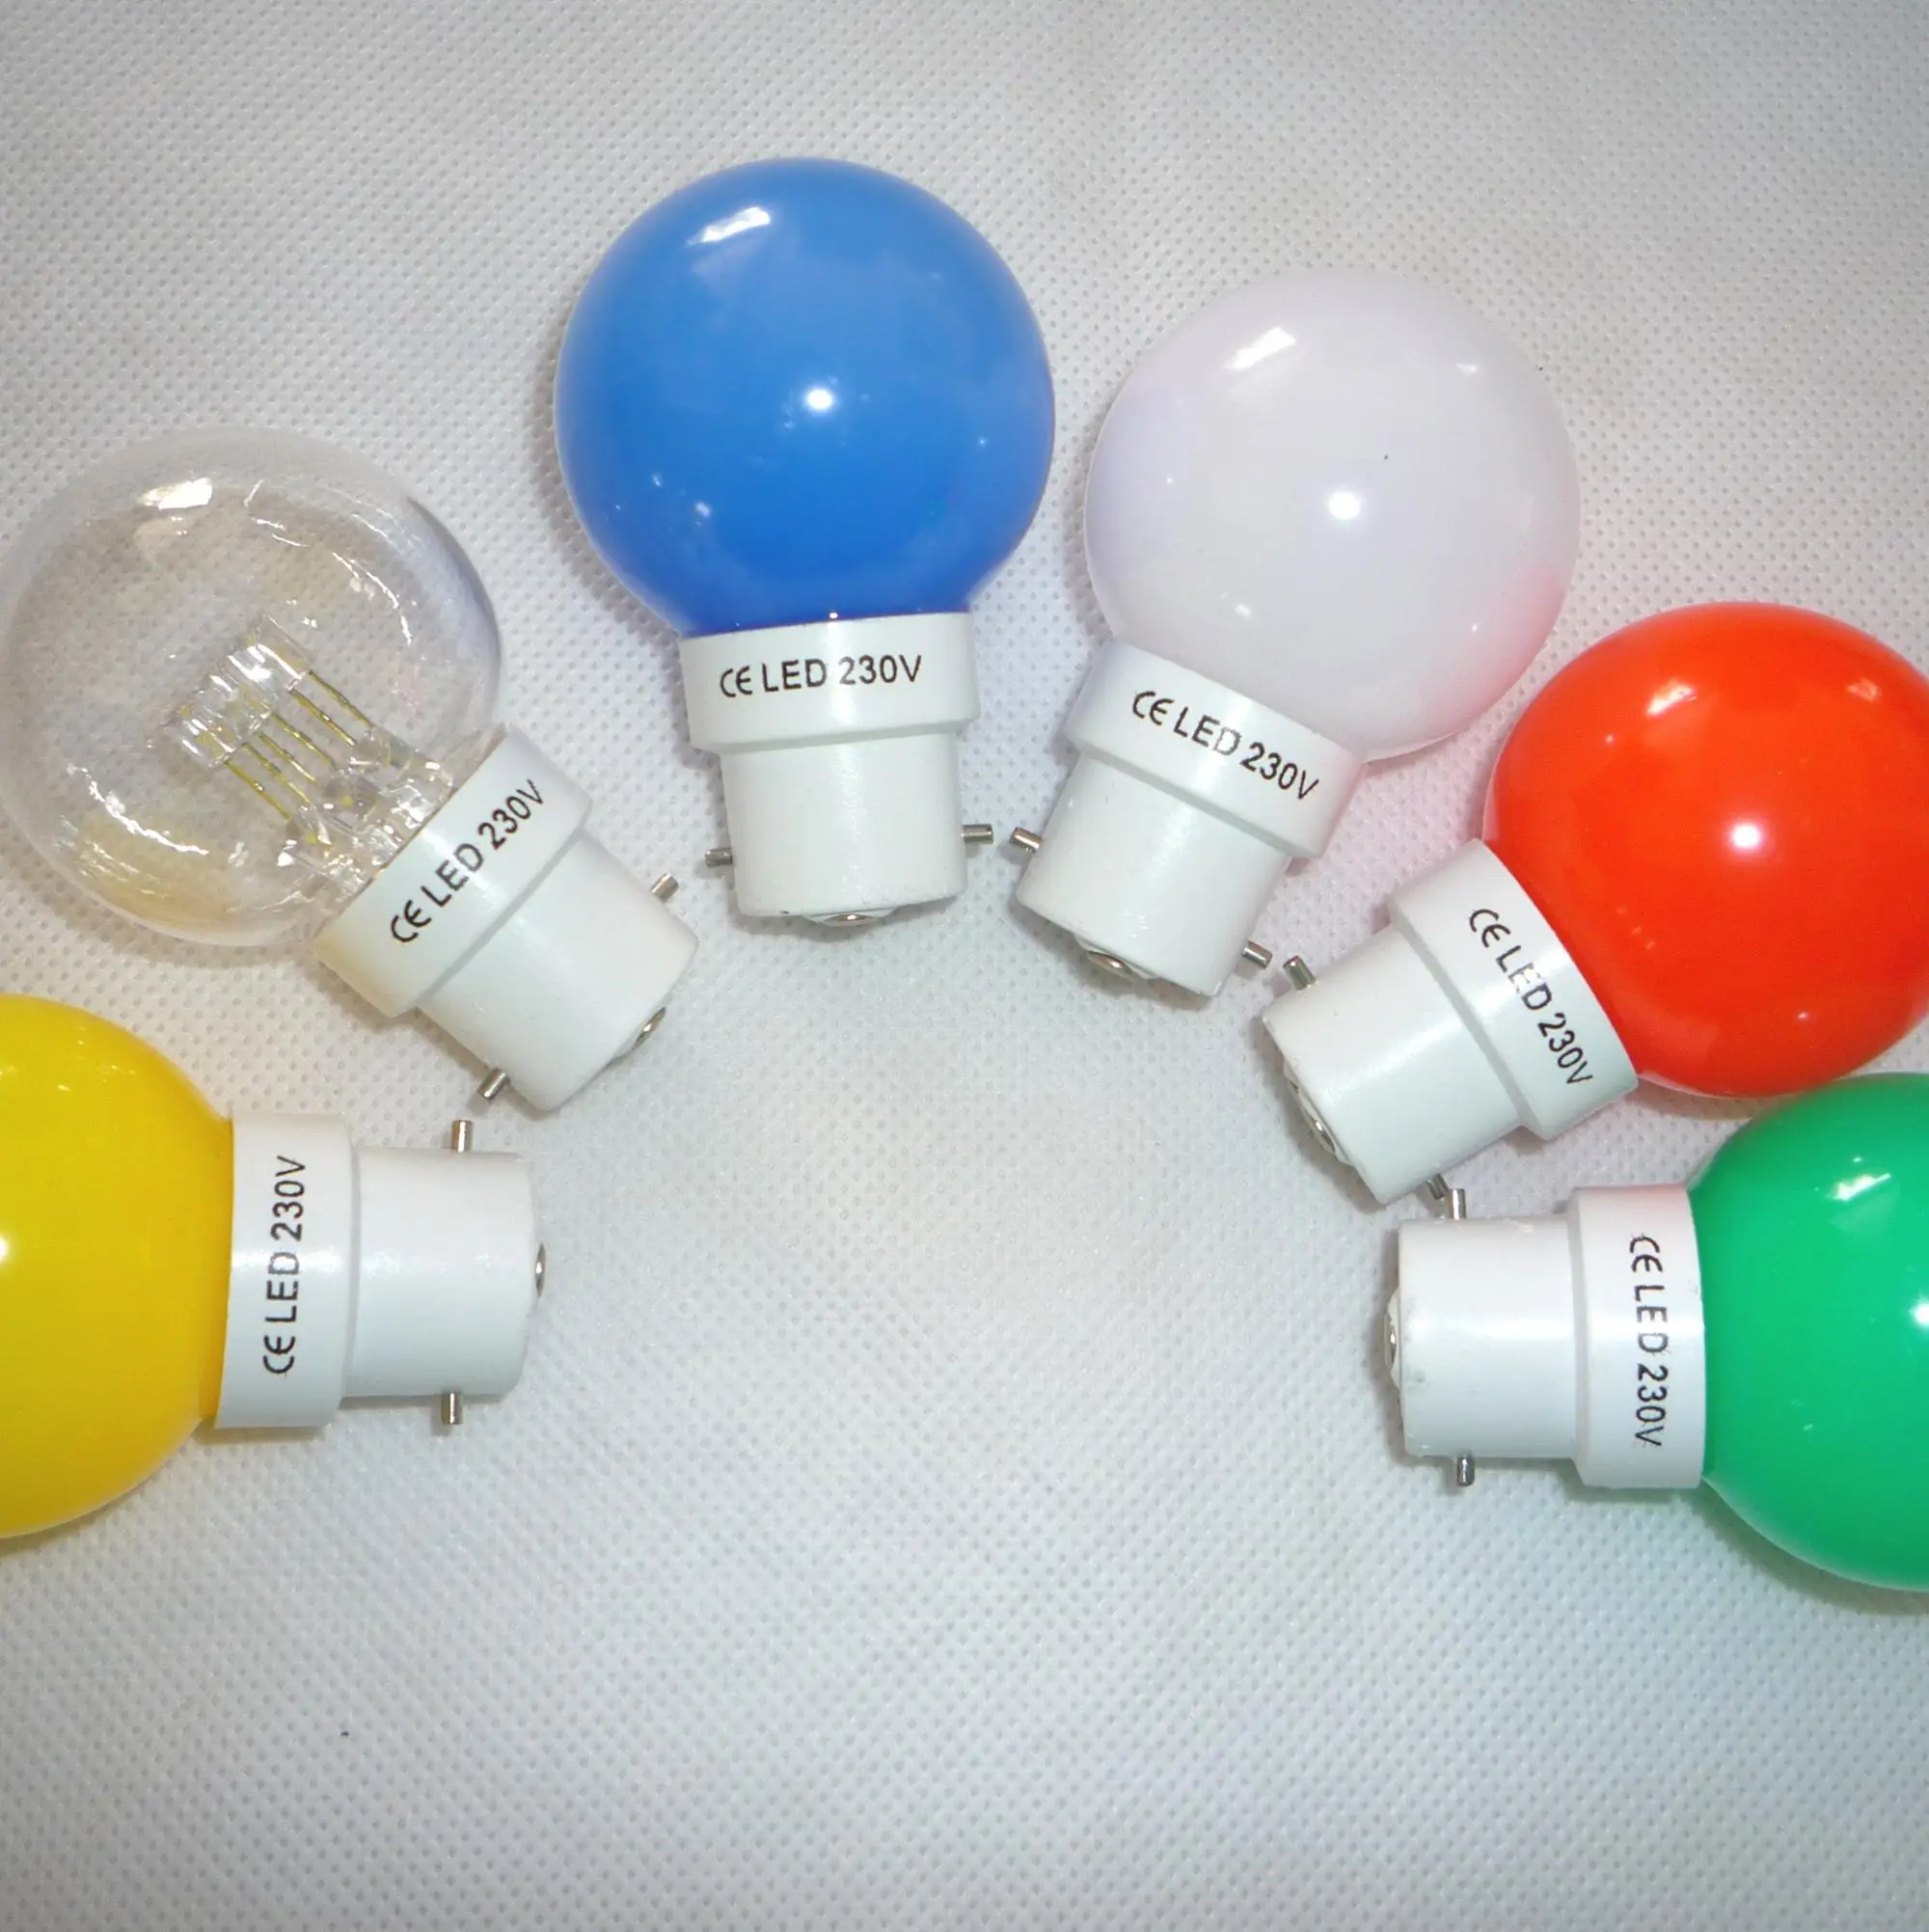 White G45 Lamps For Festoon Party Bulbs Changing Light Color Bulb Plastic Aluminium Led Waterproof Lamp